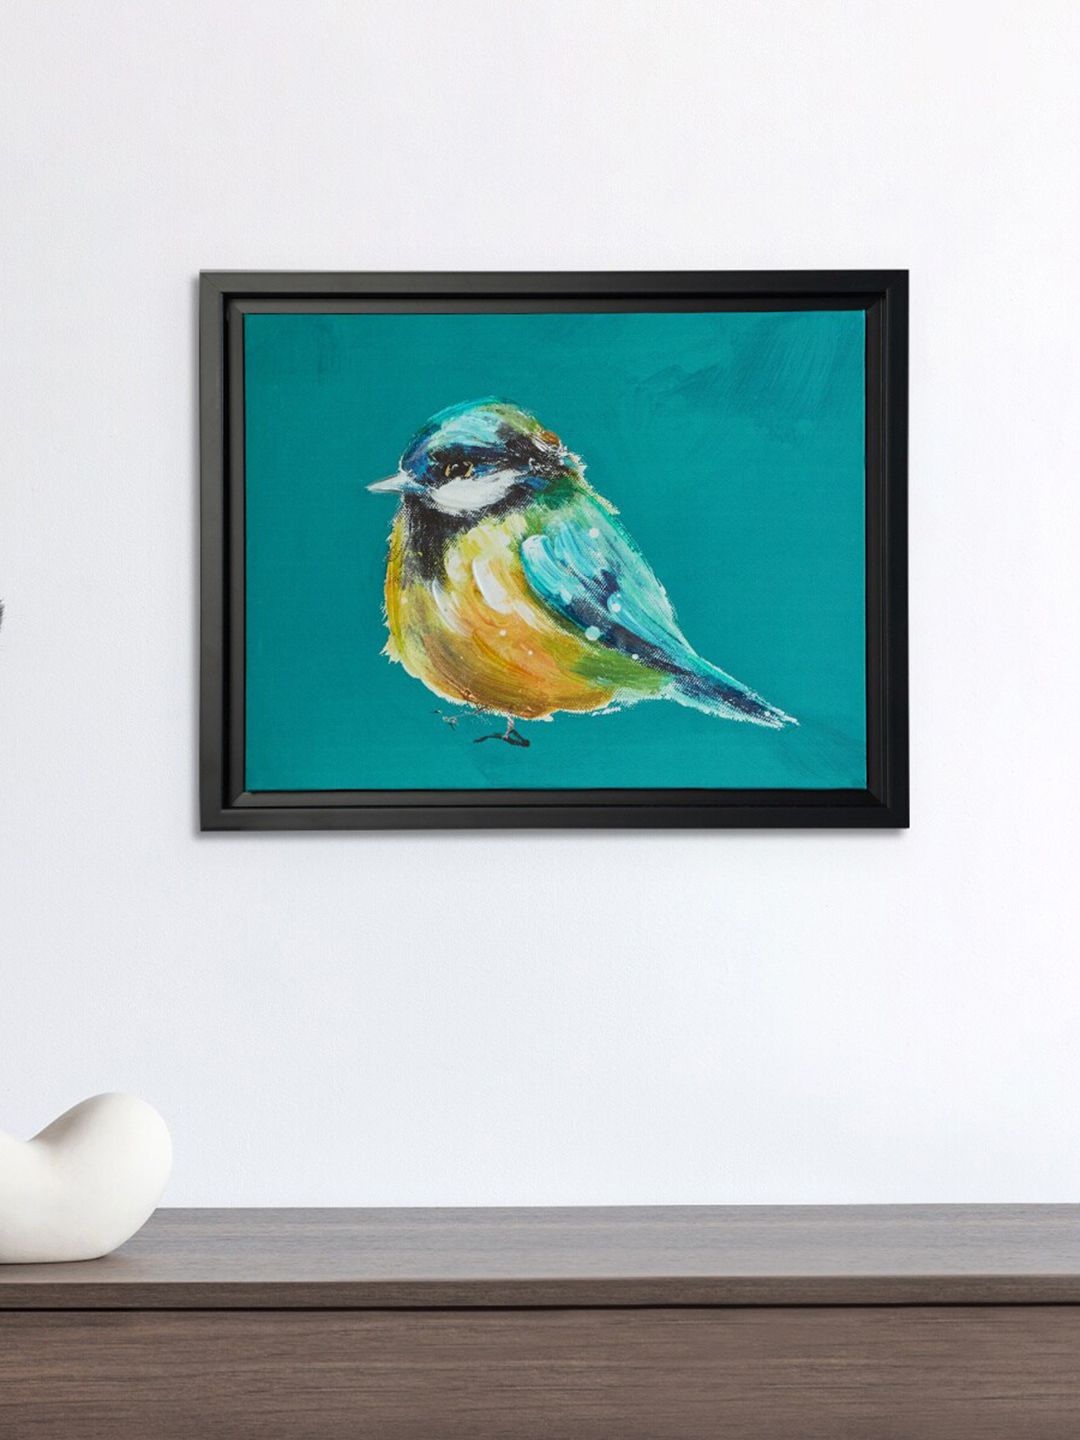 Home Centre Turquoise Blue Bird Wooden Wall Art With Frame Price in India